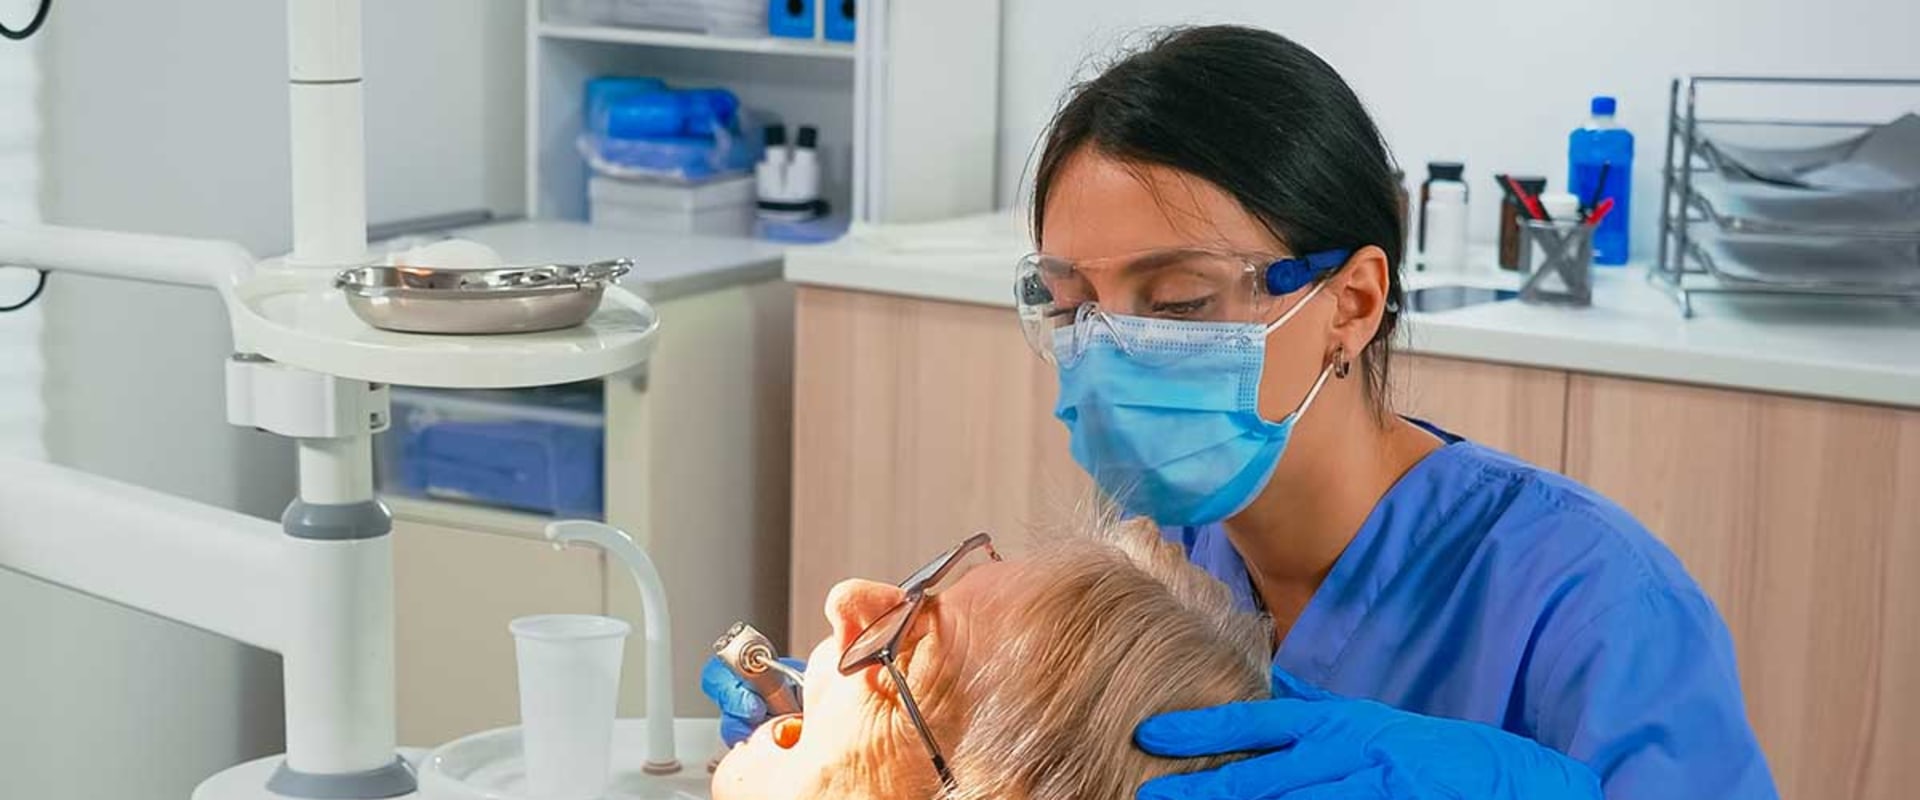 Do Emergency Dentists Offer Same-Day Appointments?